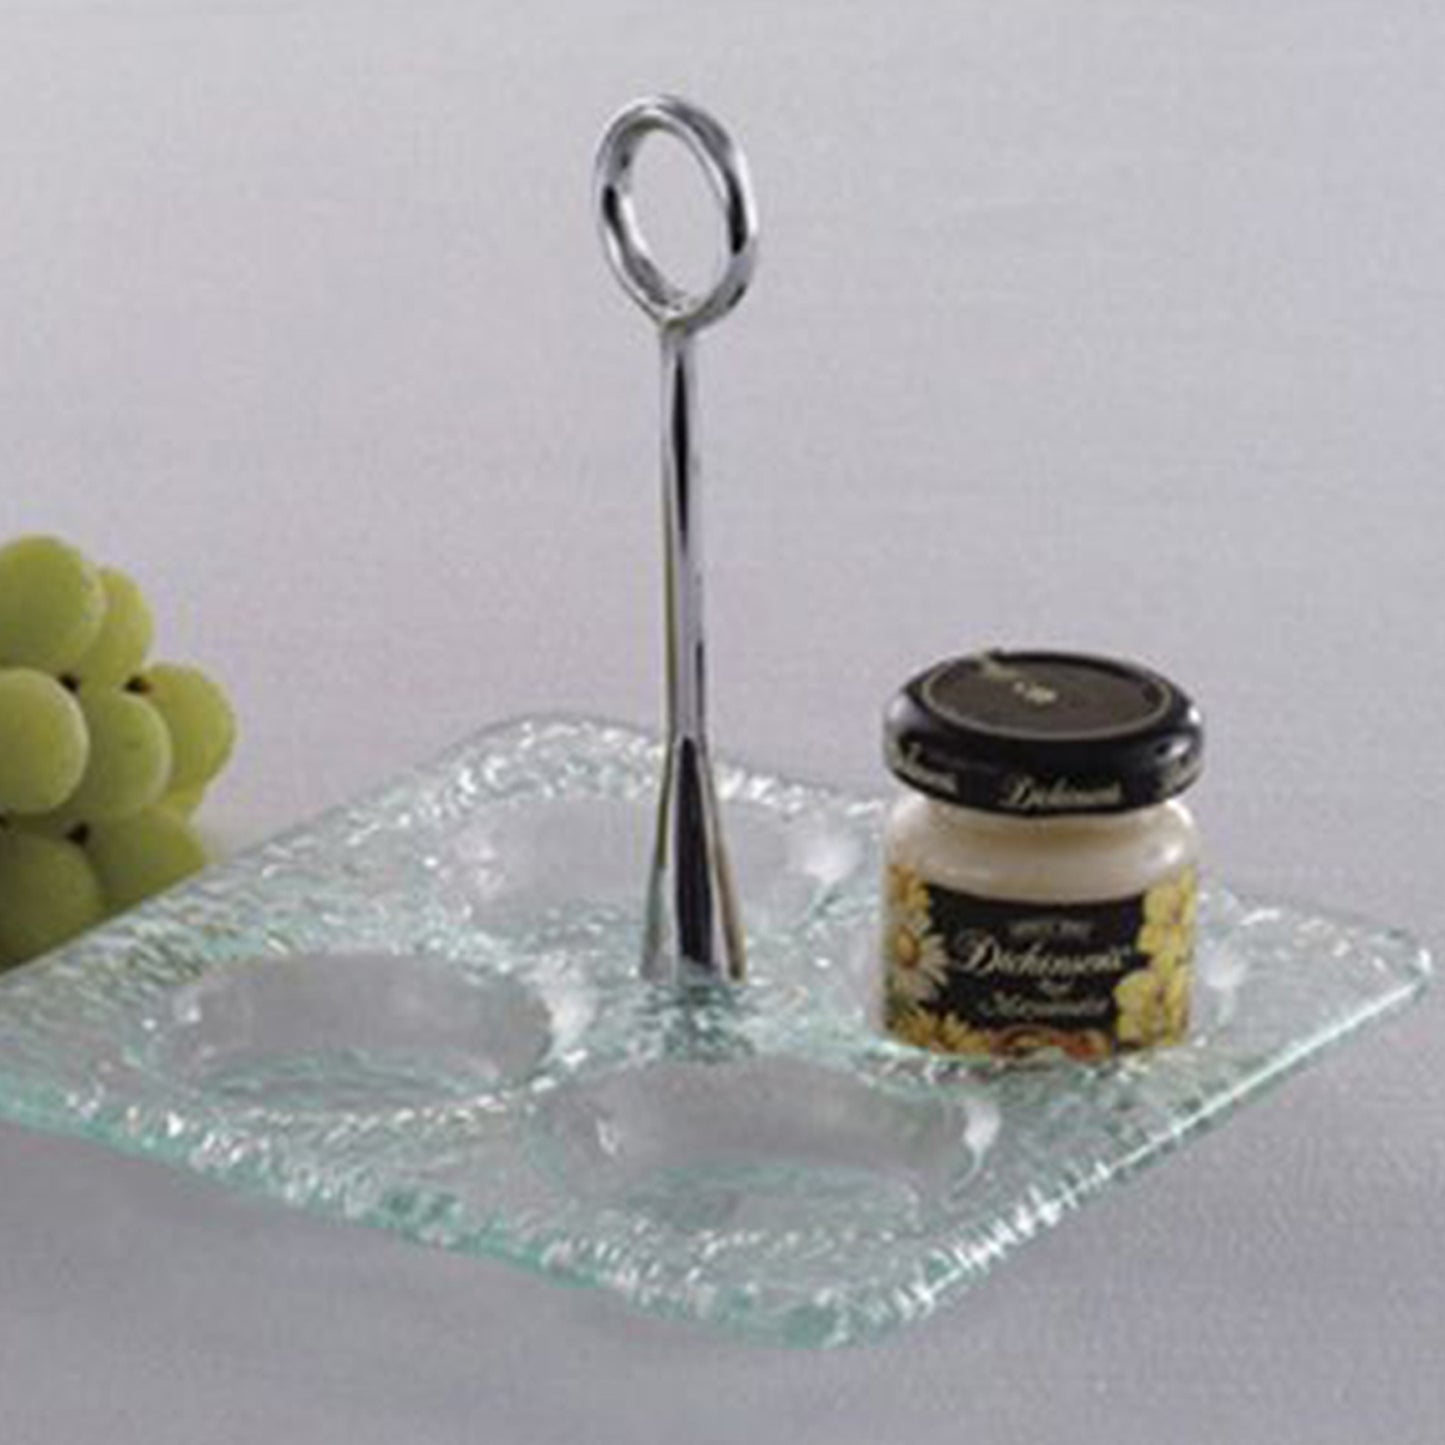 6" Square Jelly Jar Dish, Glass Base with Chrome Plated Handle (Top of Dish 3/4" H, Top of Handle 5 3/4" H)